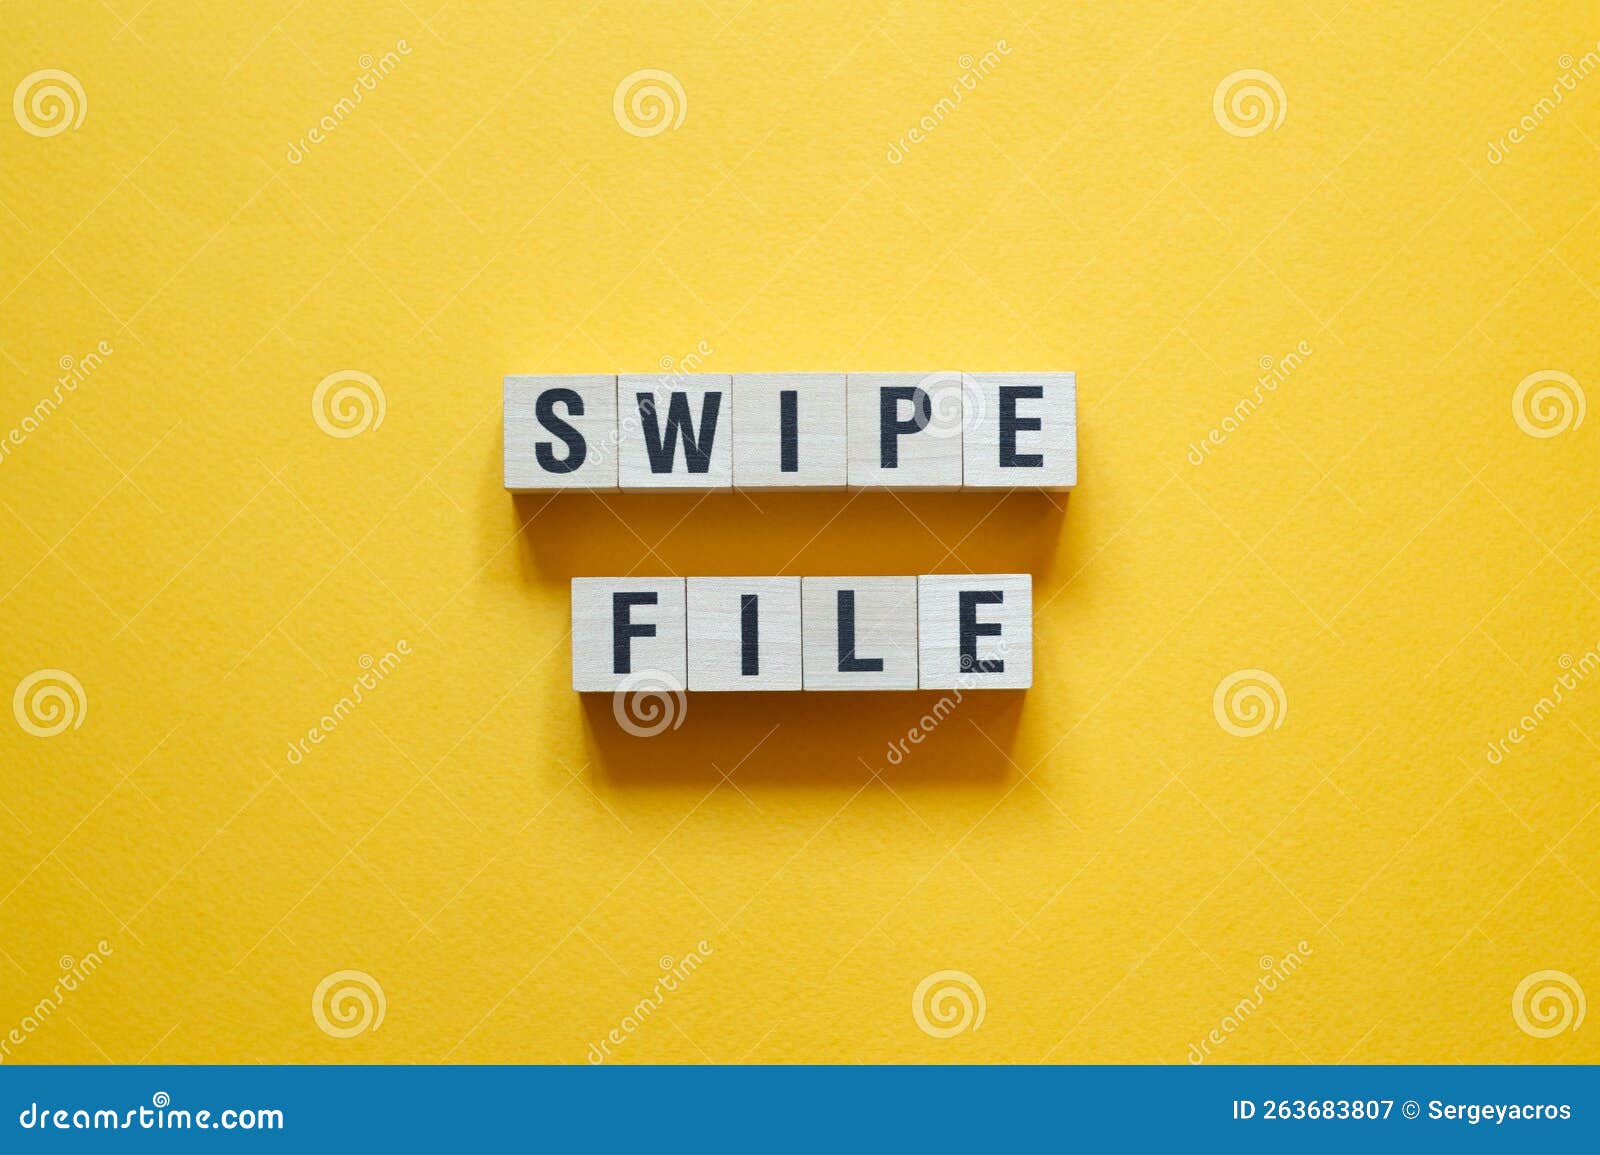 swipe file - word concept on cubes,text